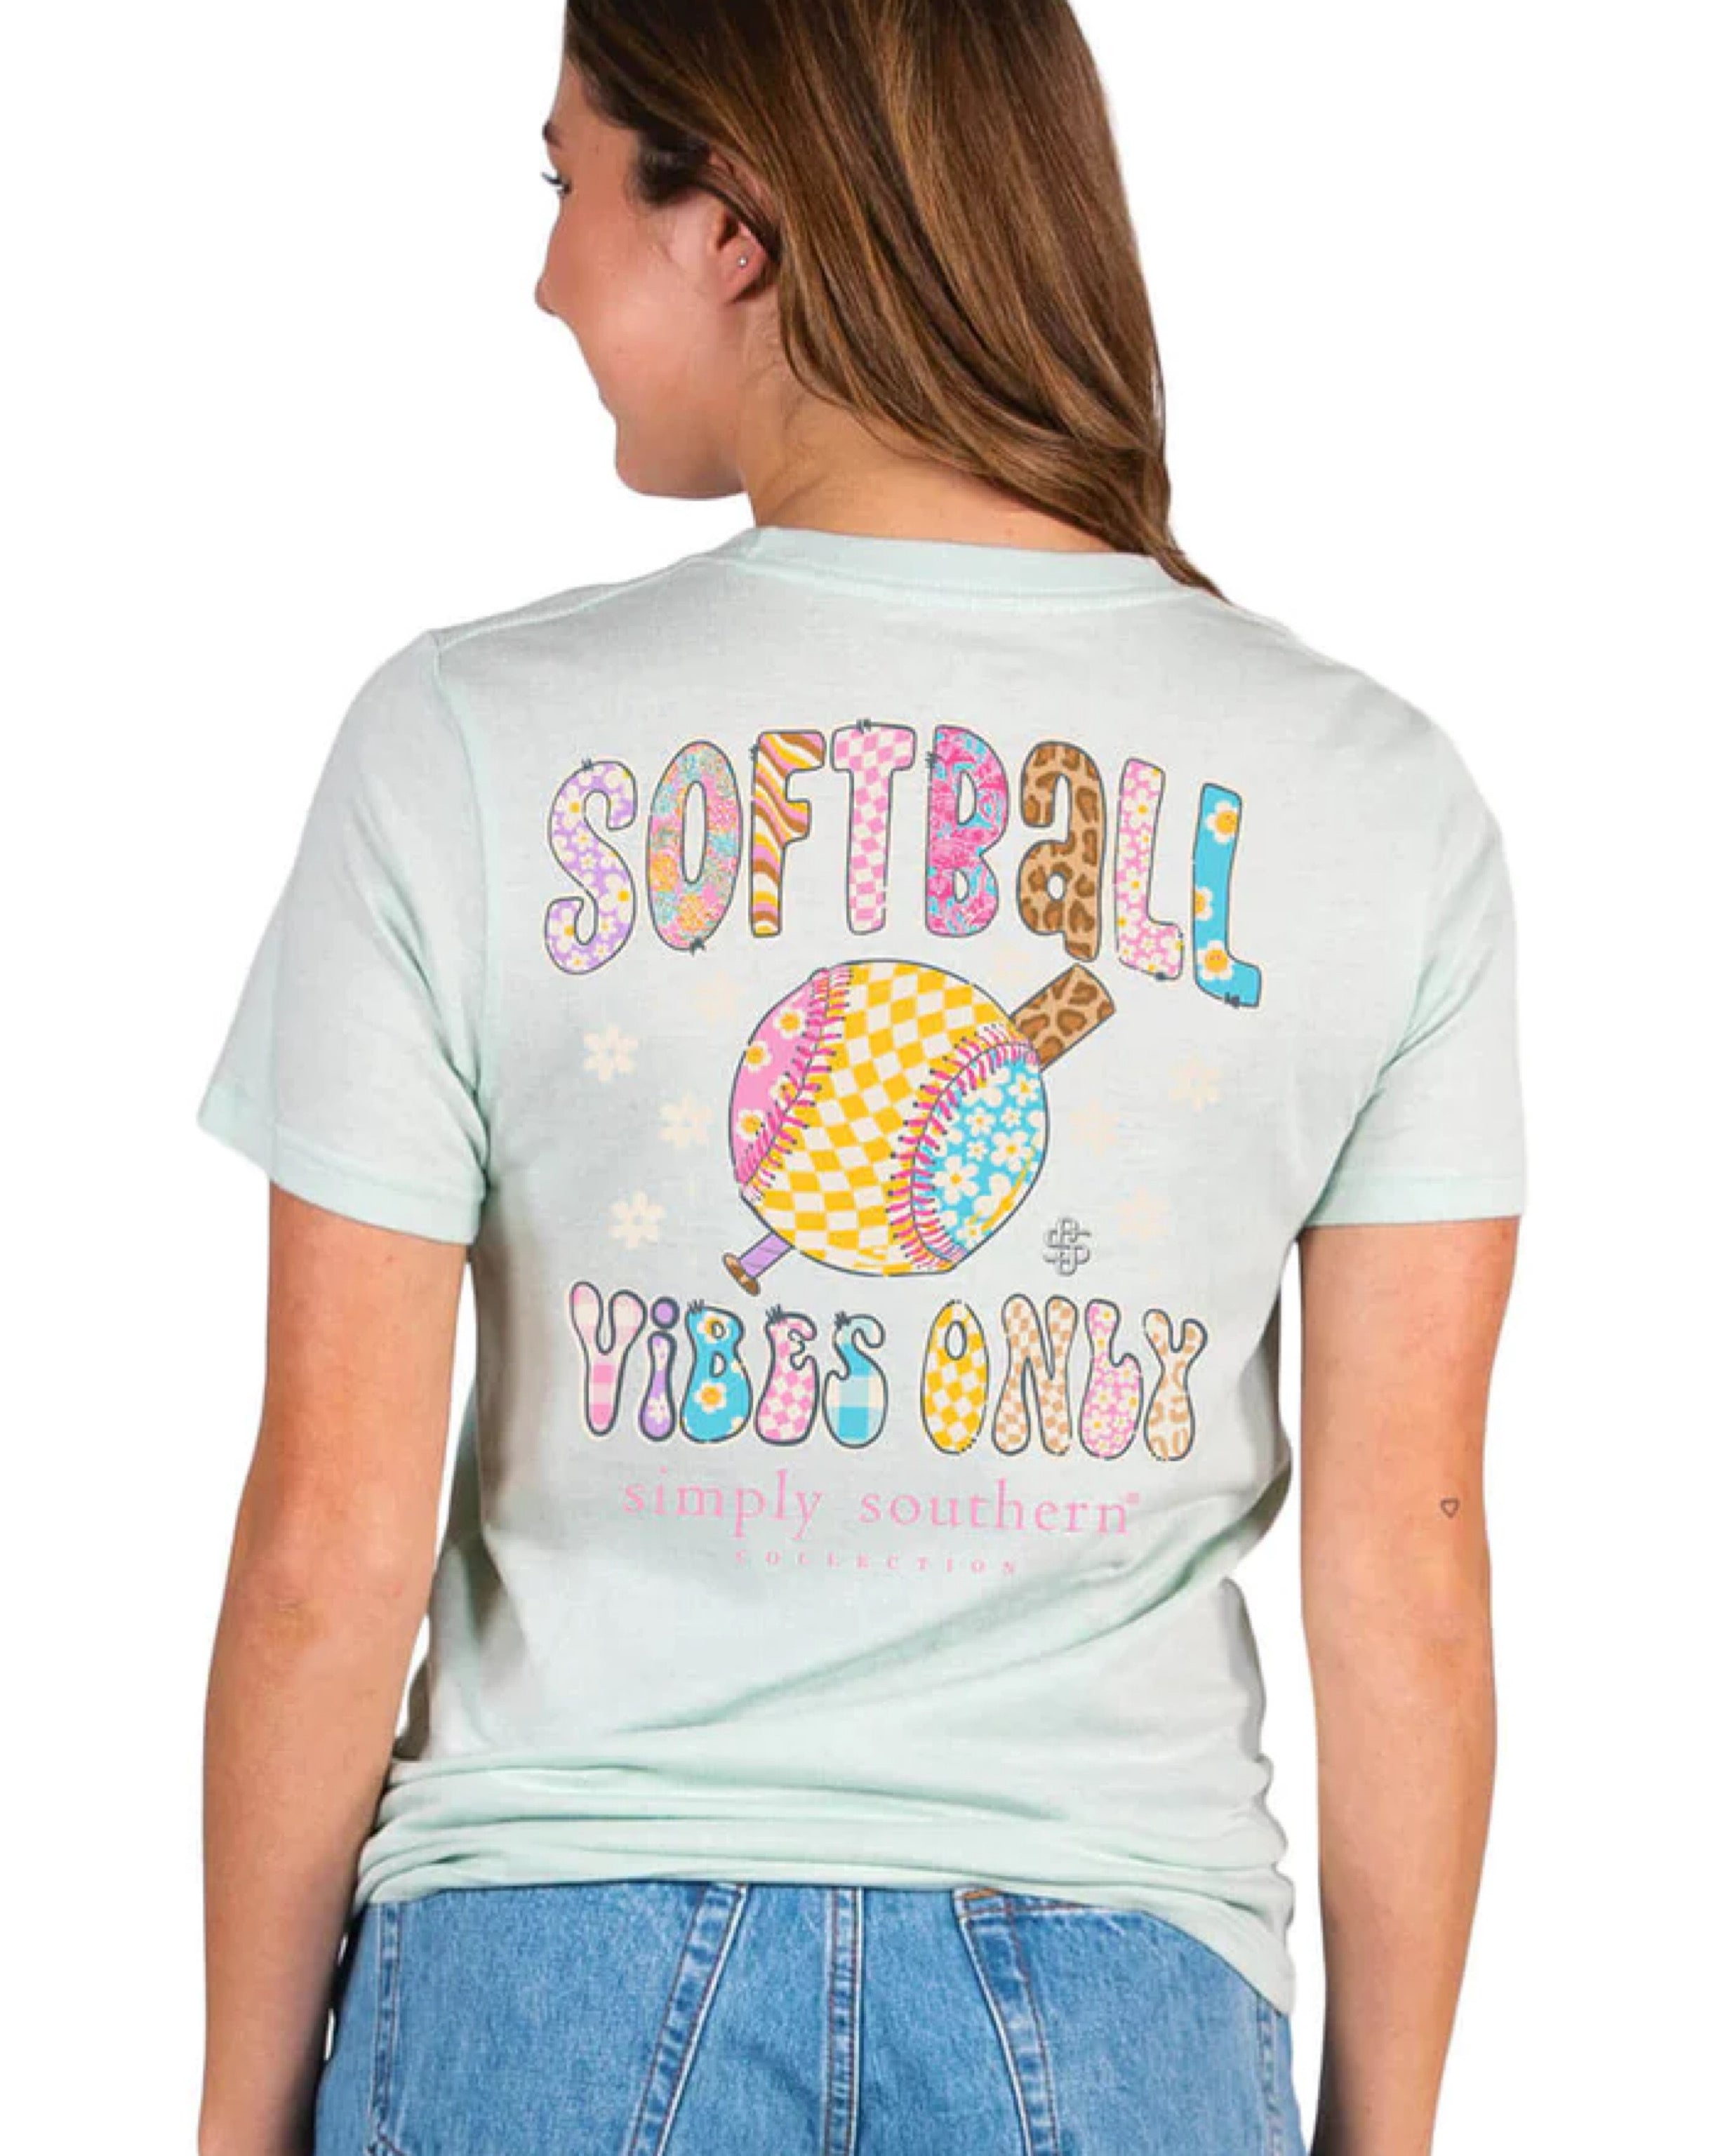 "Softball" Short Sleeve Tee by Simply Southern